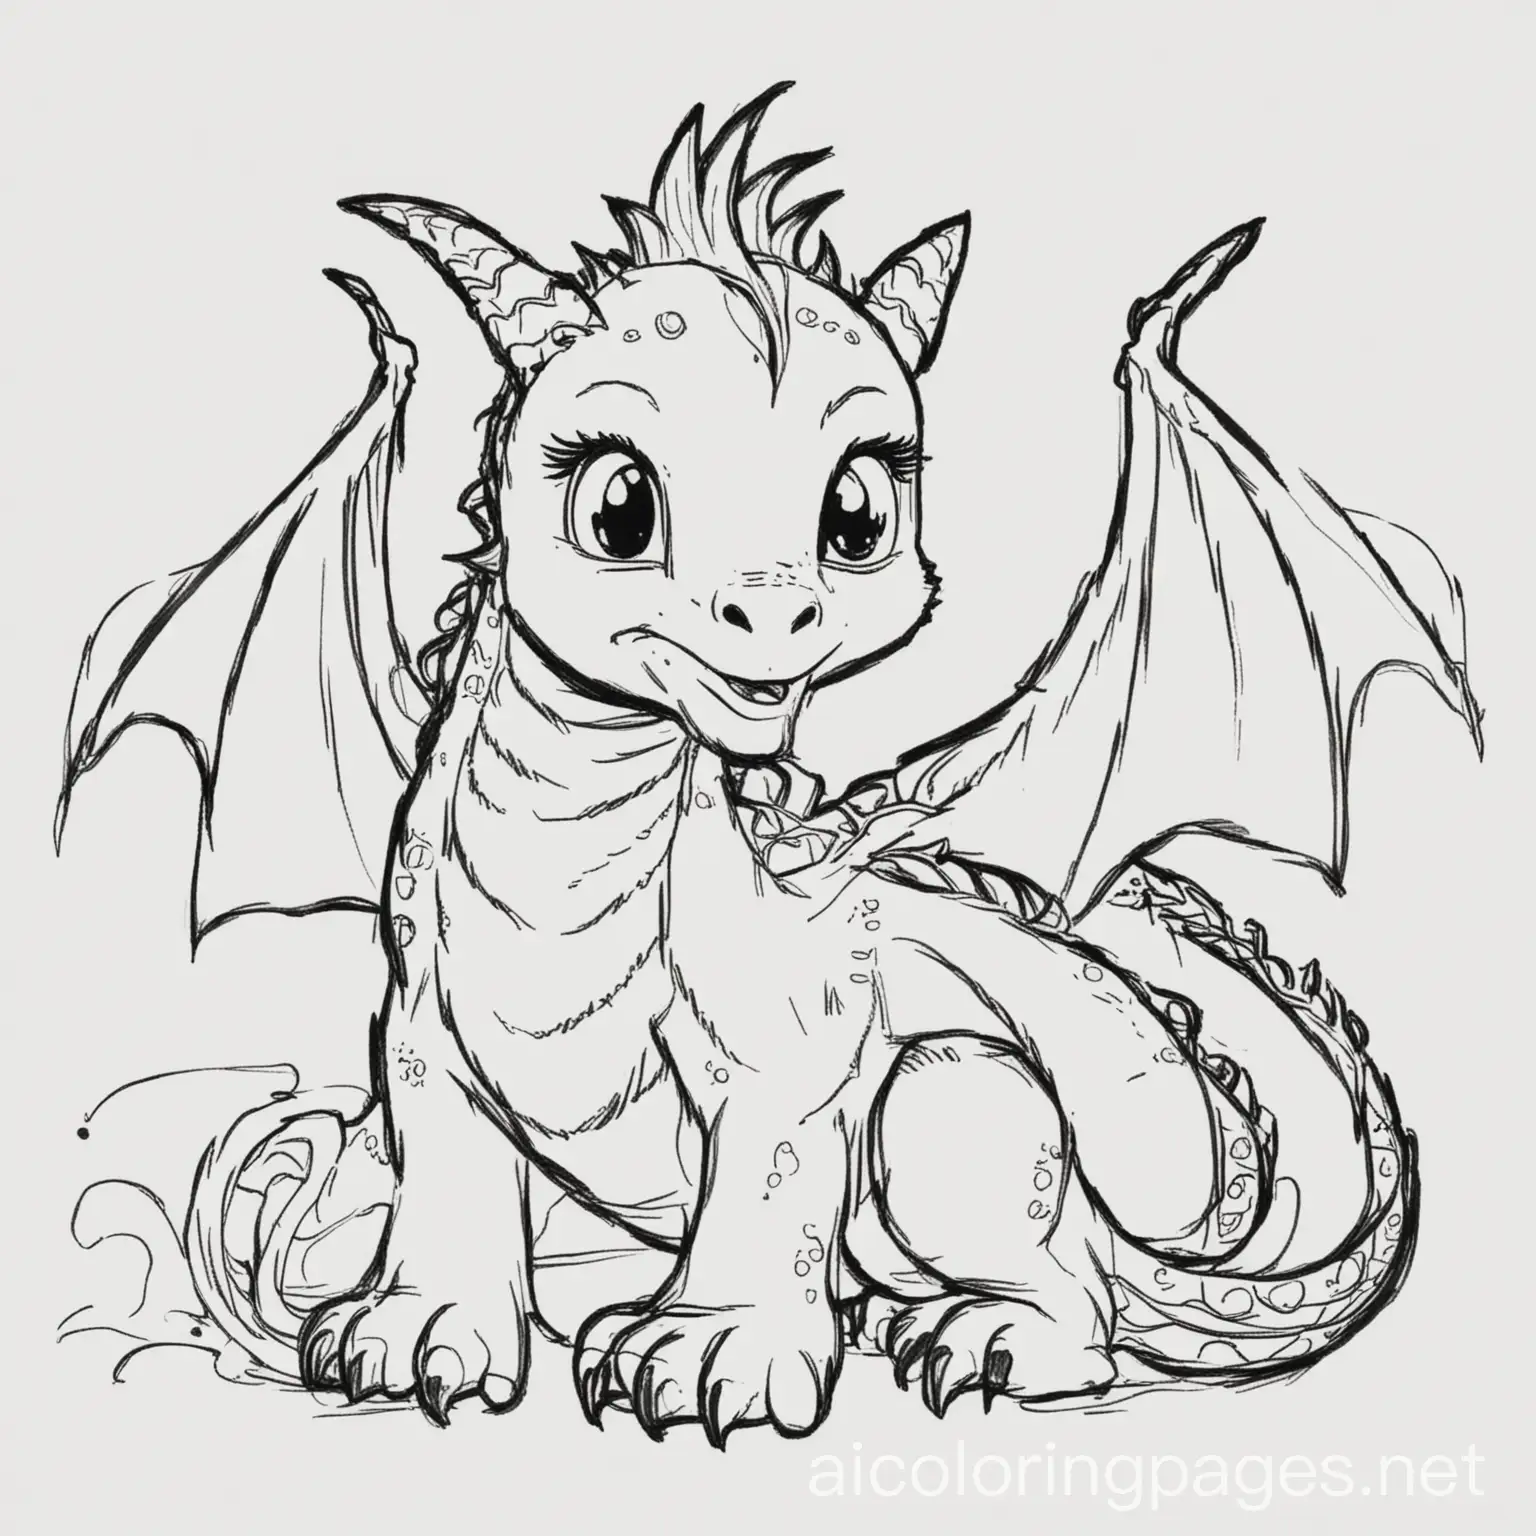 Dragon-Coloring-Page-Simple-Black-and-White-Line-Art-on-White-Background